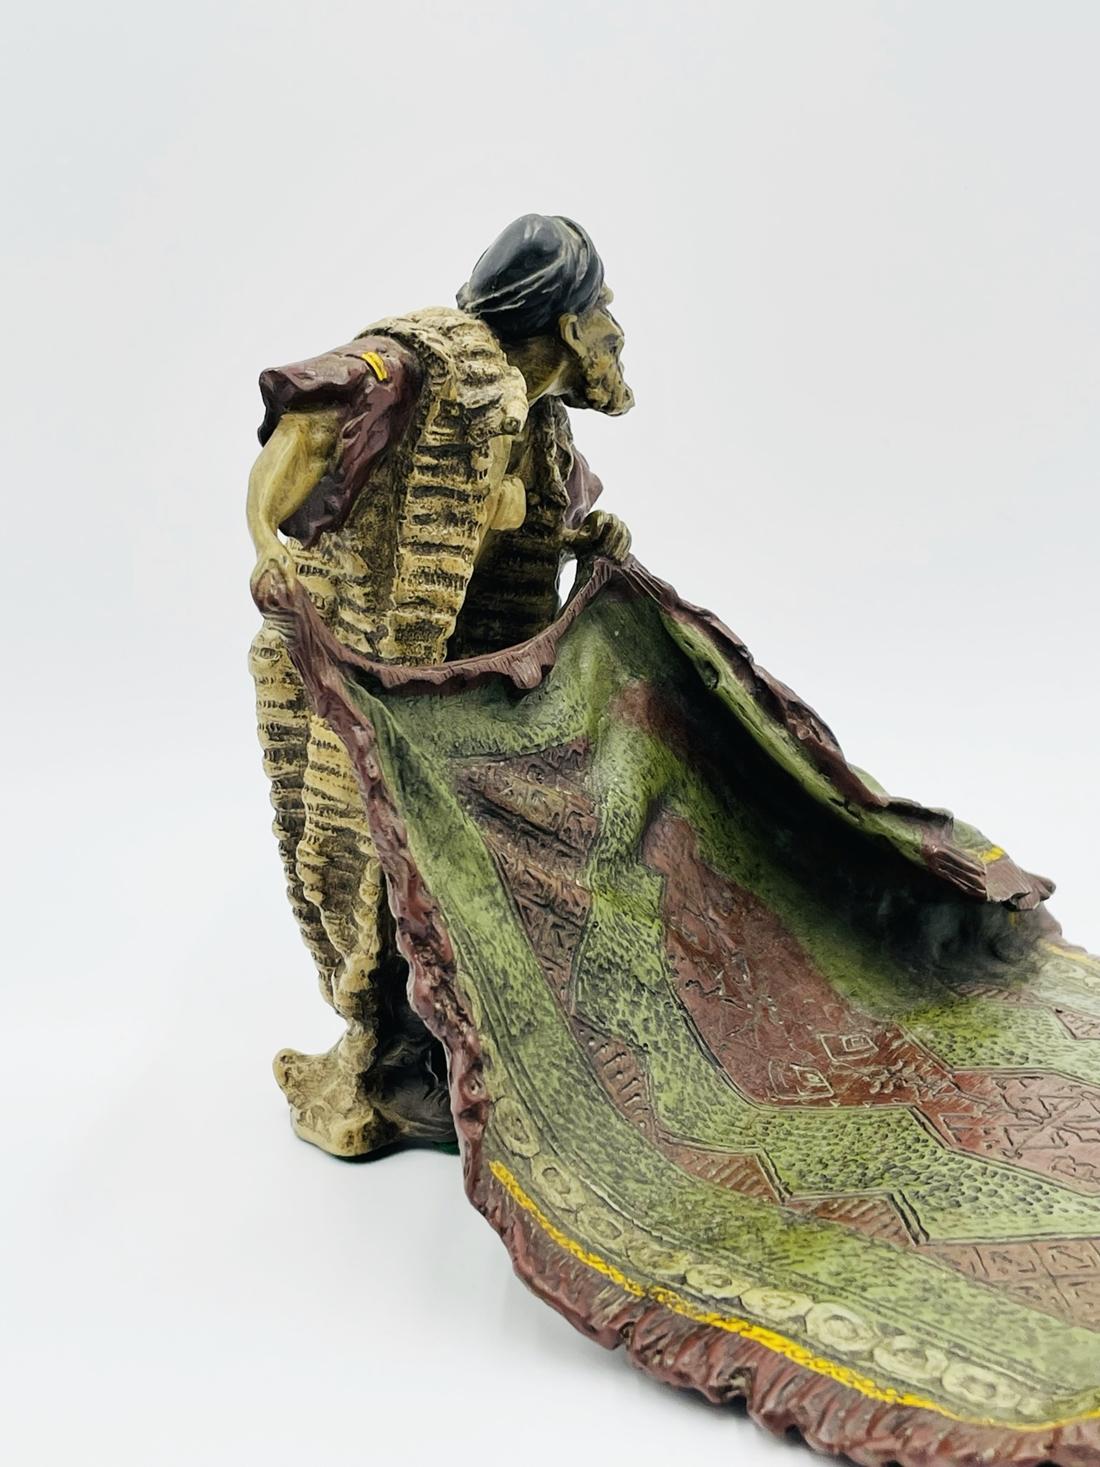 Cold painted Austrian bronze sculpture by Franz Bergman depicting a carpet trader. 
 
 Bears Franz Bergman foundry stamp impressed to underside, with additional impressed signature to lower back of figure. 
 
Measurements: 
6.75 inches high x 7